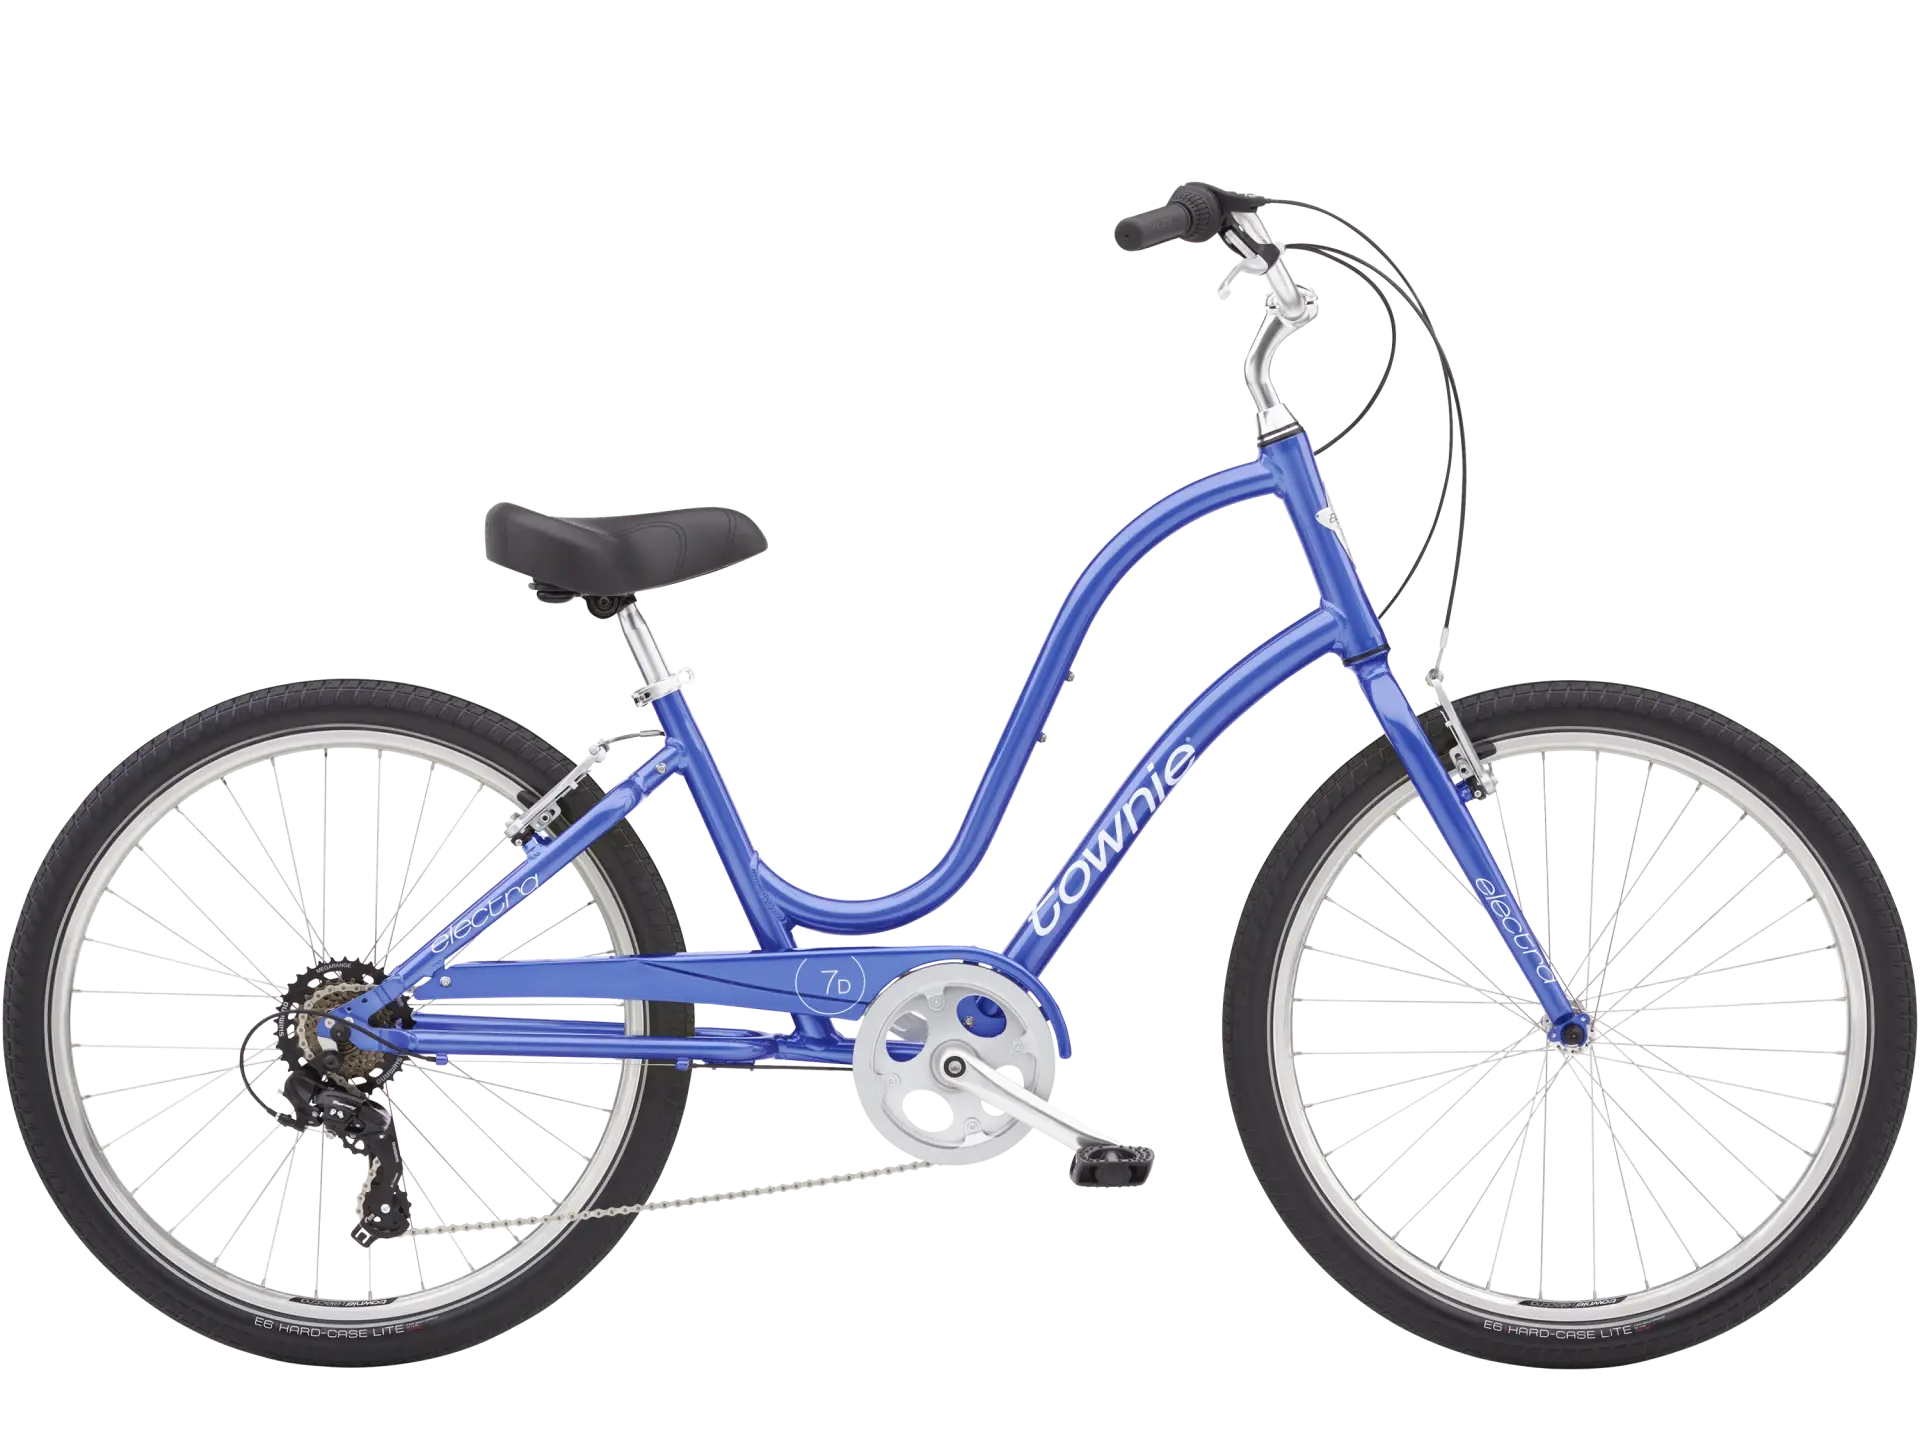 Brooks Myth 7s 26 - Dark Blue2017, Gear Cycle with Rim Brakes, City cycles  below Rs.10,000